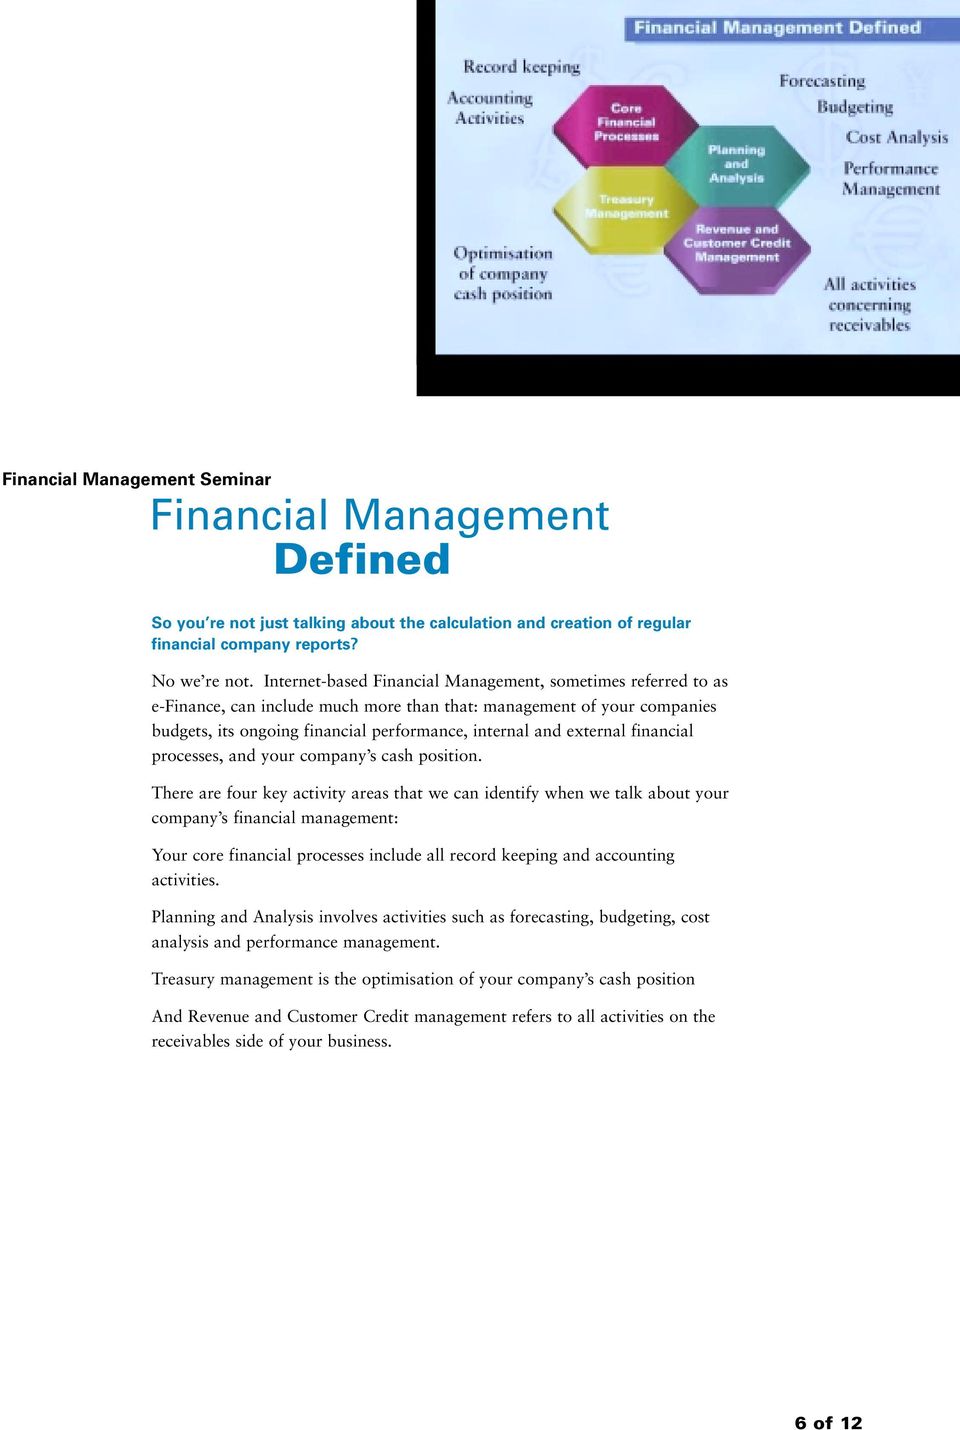 external financial processes, and your company s cash position.